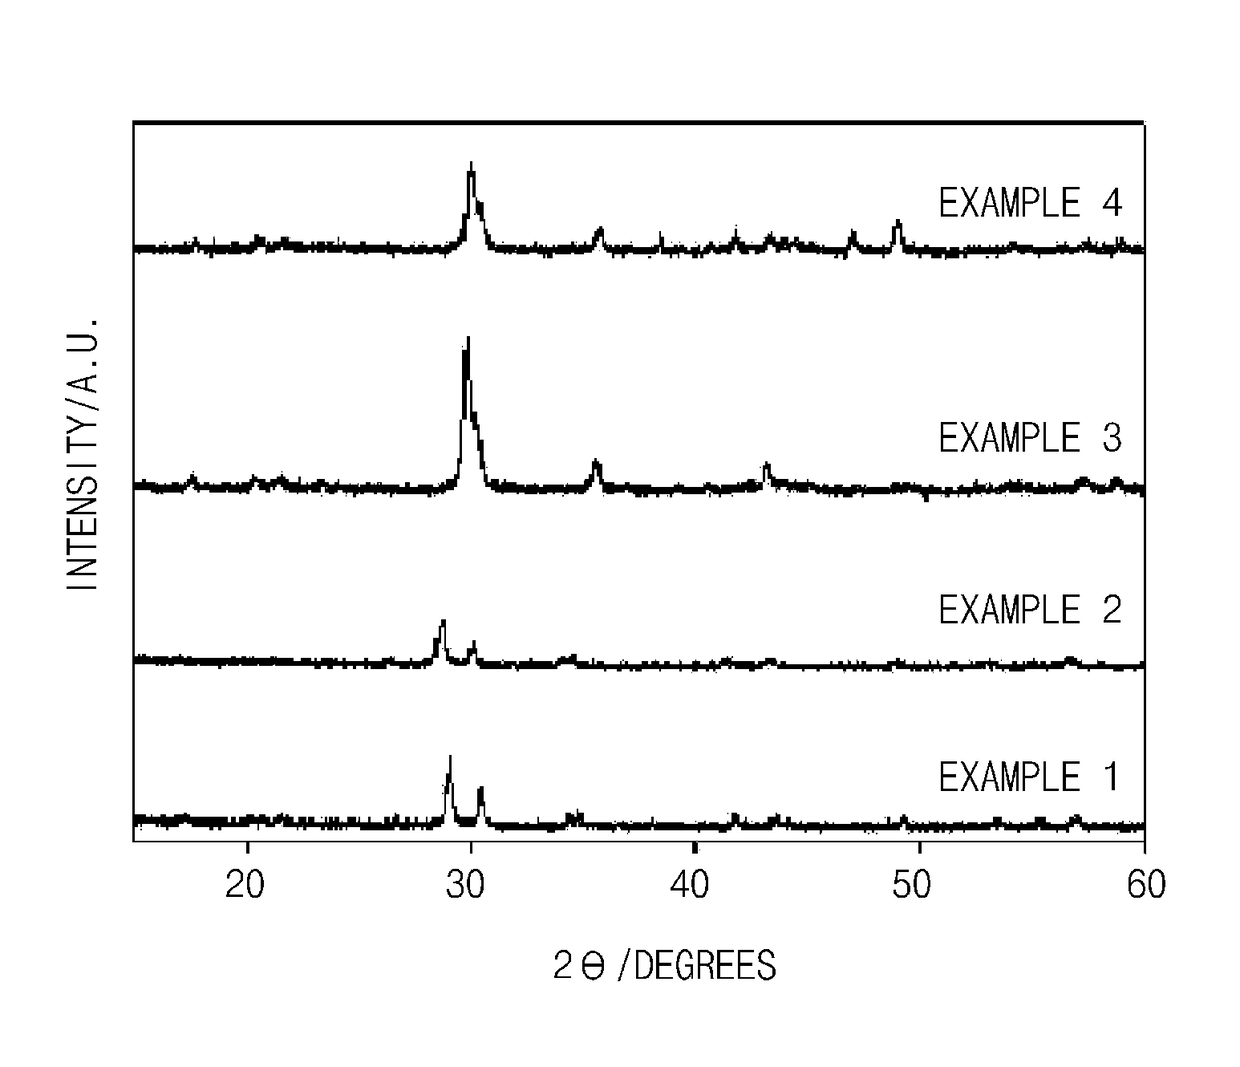 Transition metal-pyrophosphate anode active material, method of preparing the same, and lithium secondary battery or hybrid capacitor including the anode active material